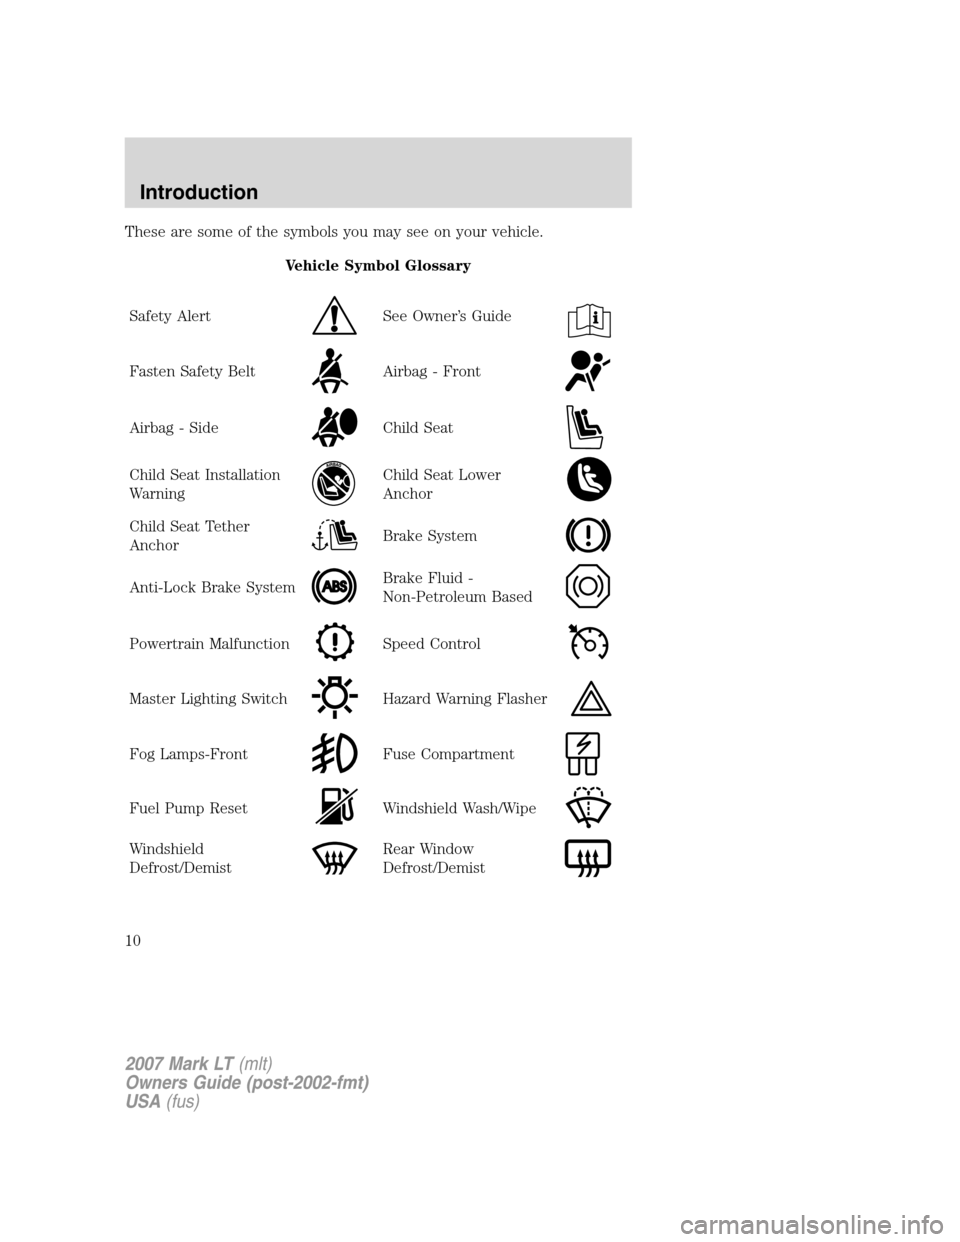 LINCOLN MARK LT 2007  Owners Manual These are some of the symbols you may see on your vehicle.
Vehicle Symbol Glossary
Safety Alert
See Owner’s Guide
Fasten Safety BeltAirbag - Front
Airbag - SideChild Seat
Child Seat Installation
War